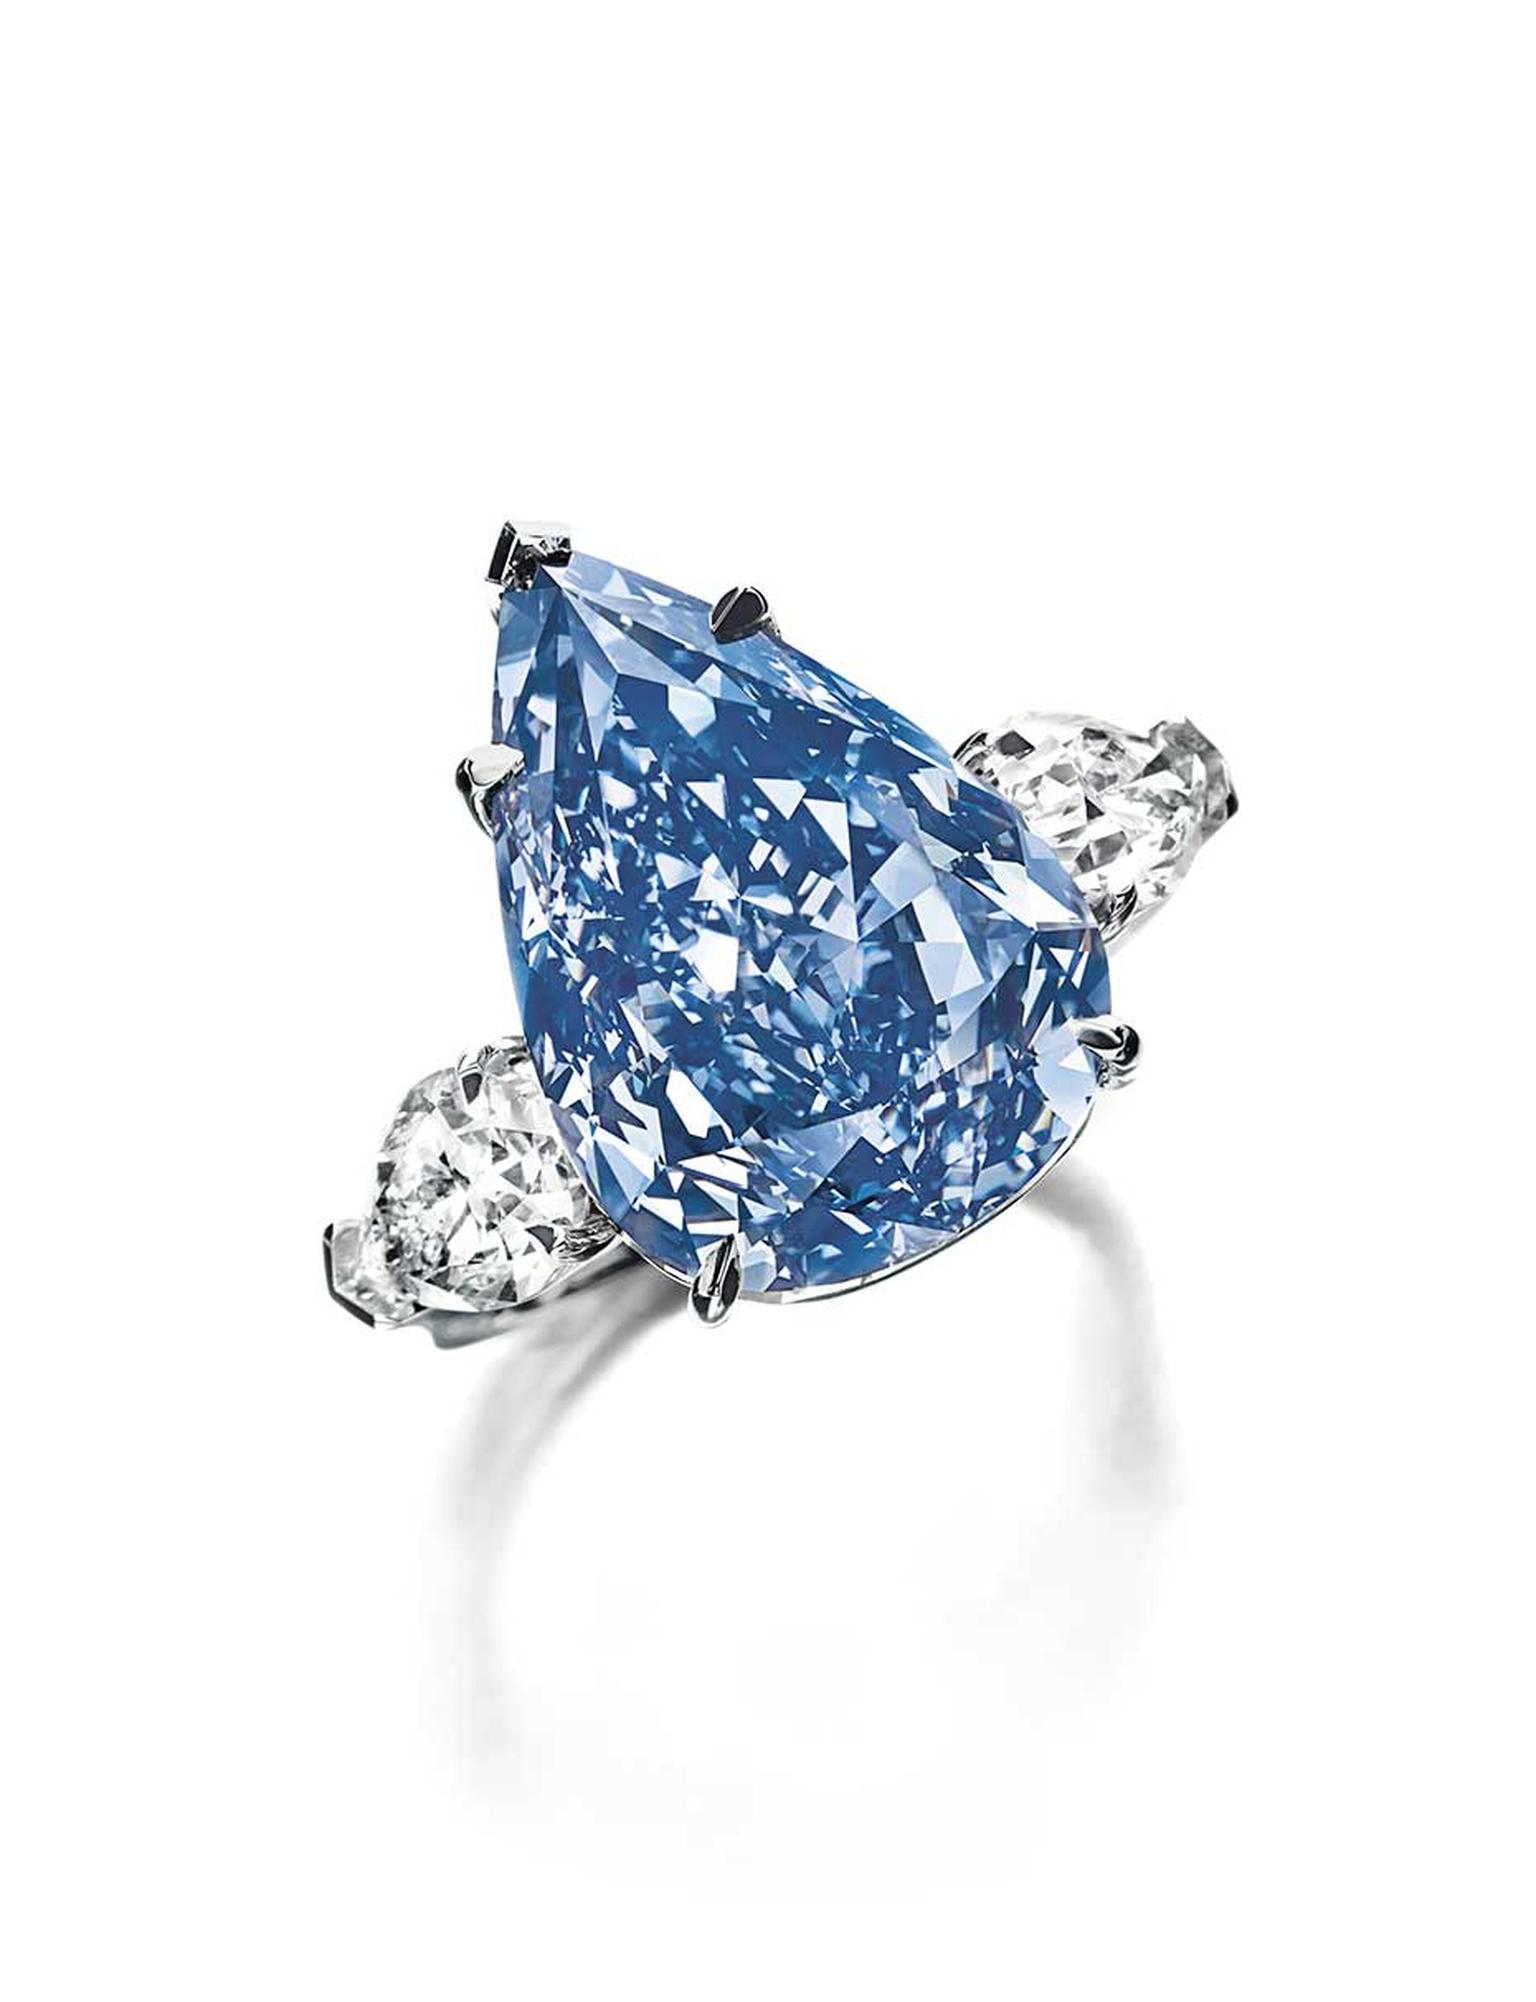 'The Winston Blue' diamond set a new world auction record for the price per carat for a blue diamond at Christie's Geneva